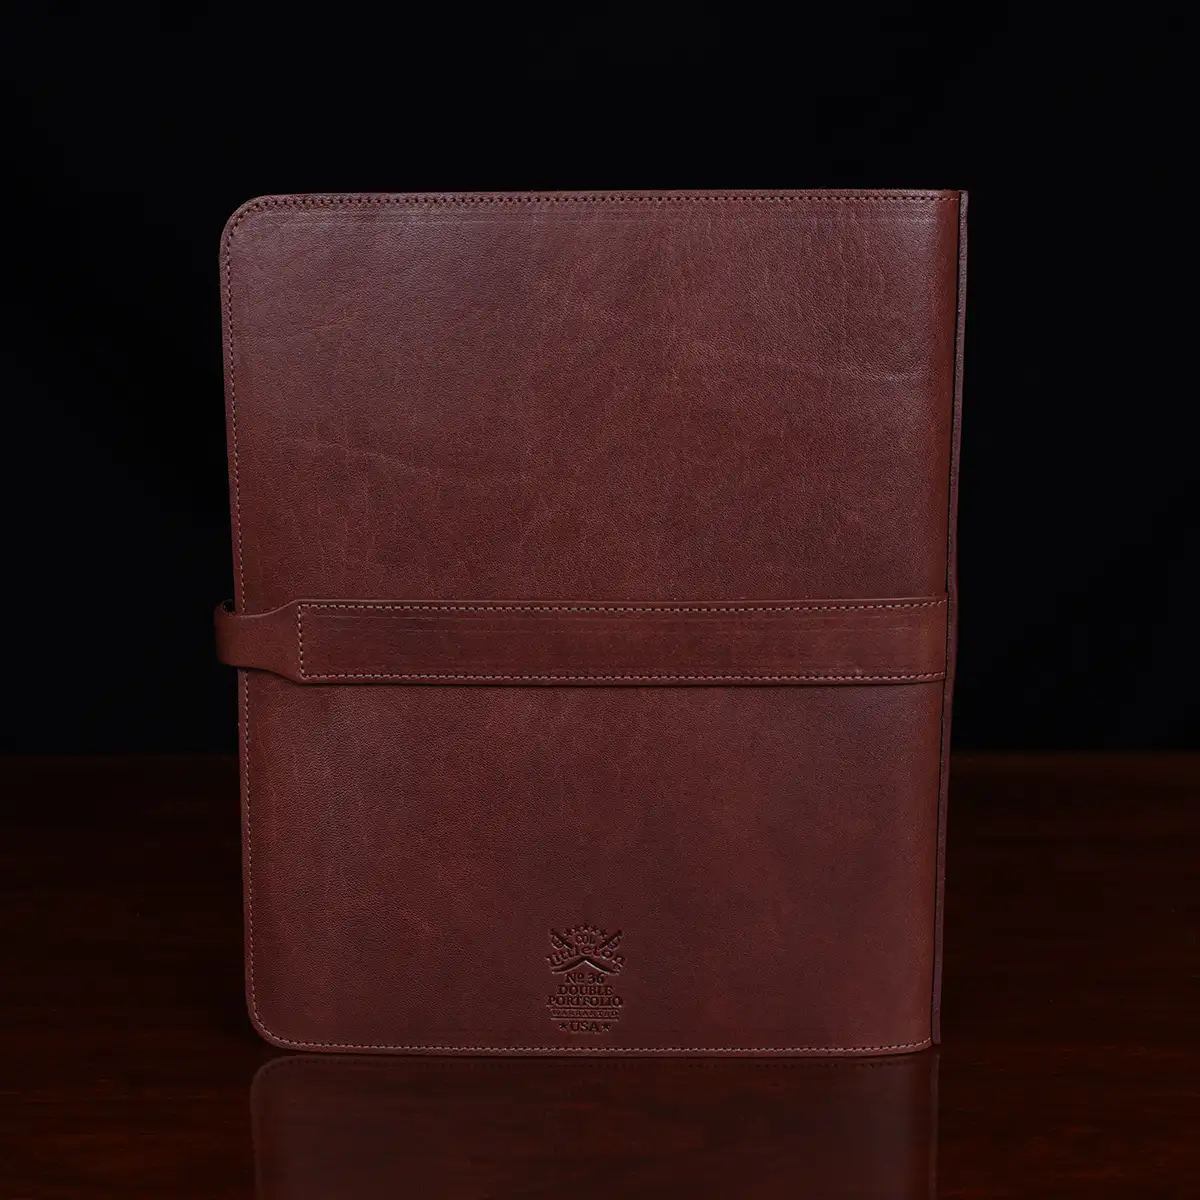 No. 36 Leather Double Portfolio in Vintage Brown back view